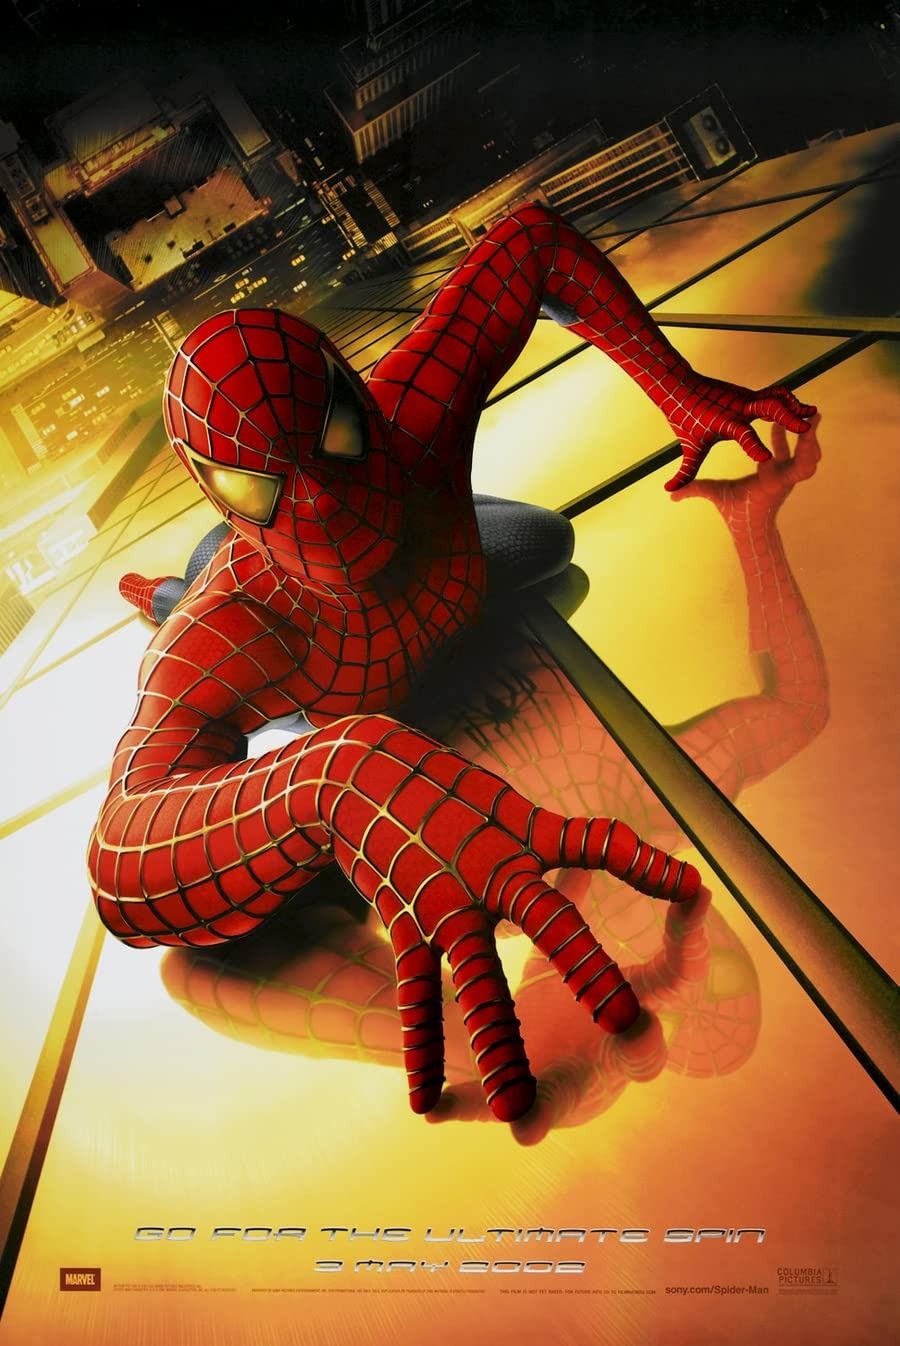 13 Best Spider-Man Movie Suits Ranked Worst to Best (Including No